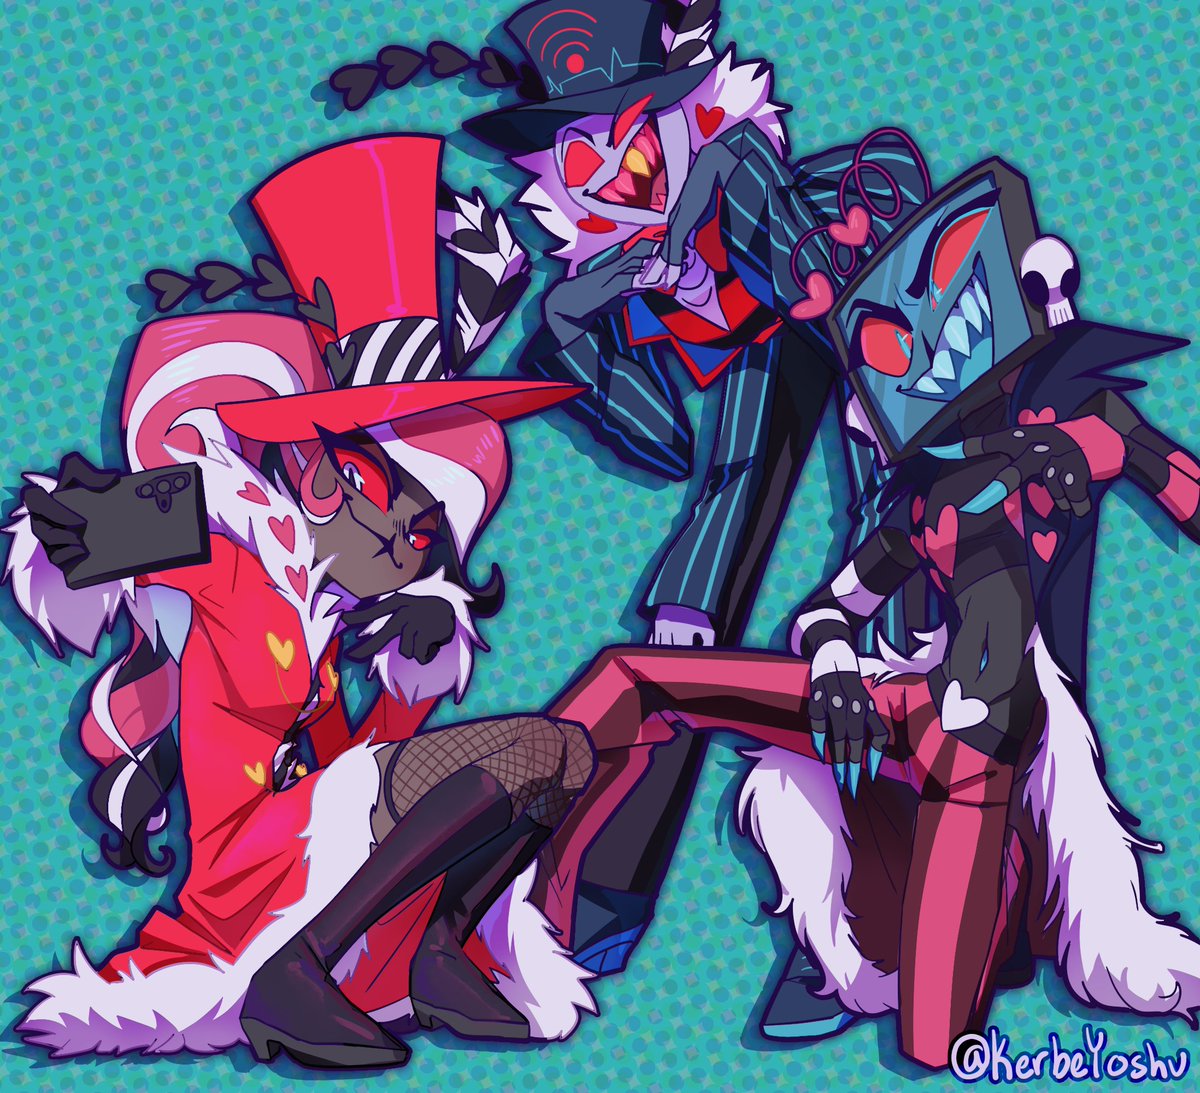 the vees outfit swap !!!!!
not that proud of this one but i finished it anywas x'3

#hazbinhotelfanart #voxval #vees